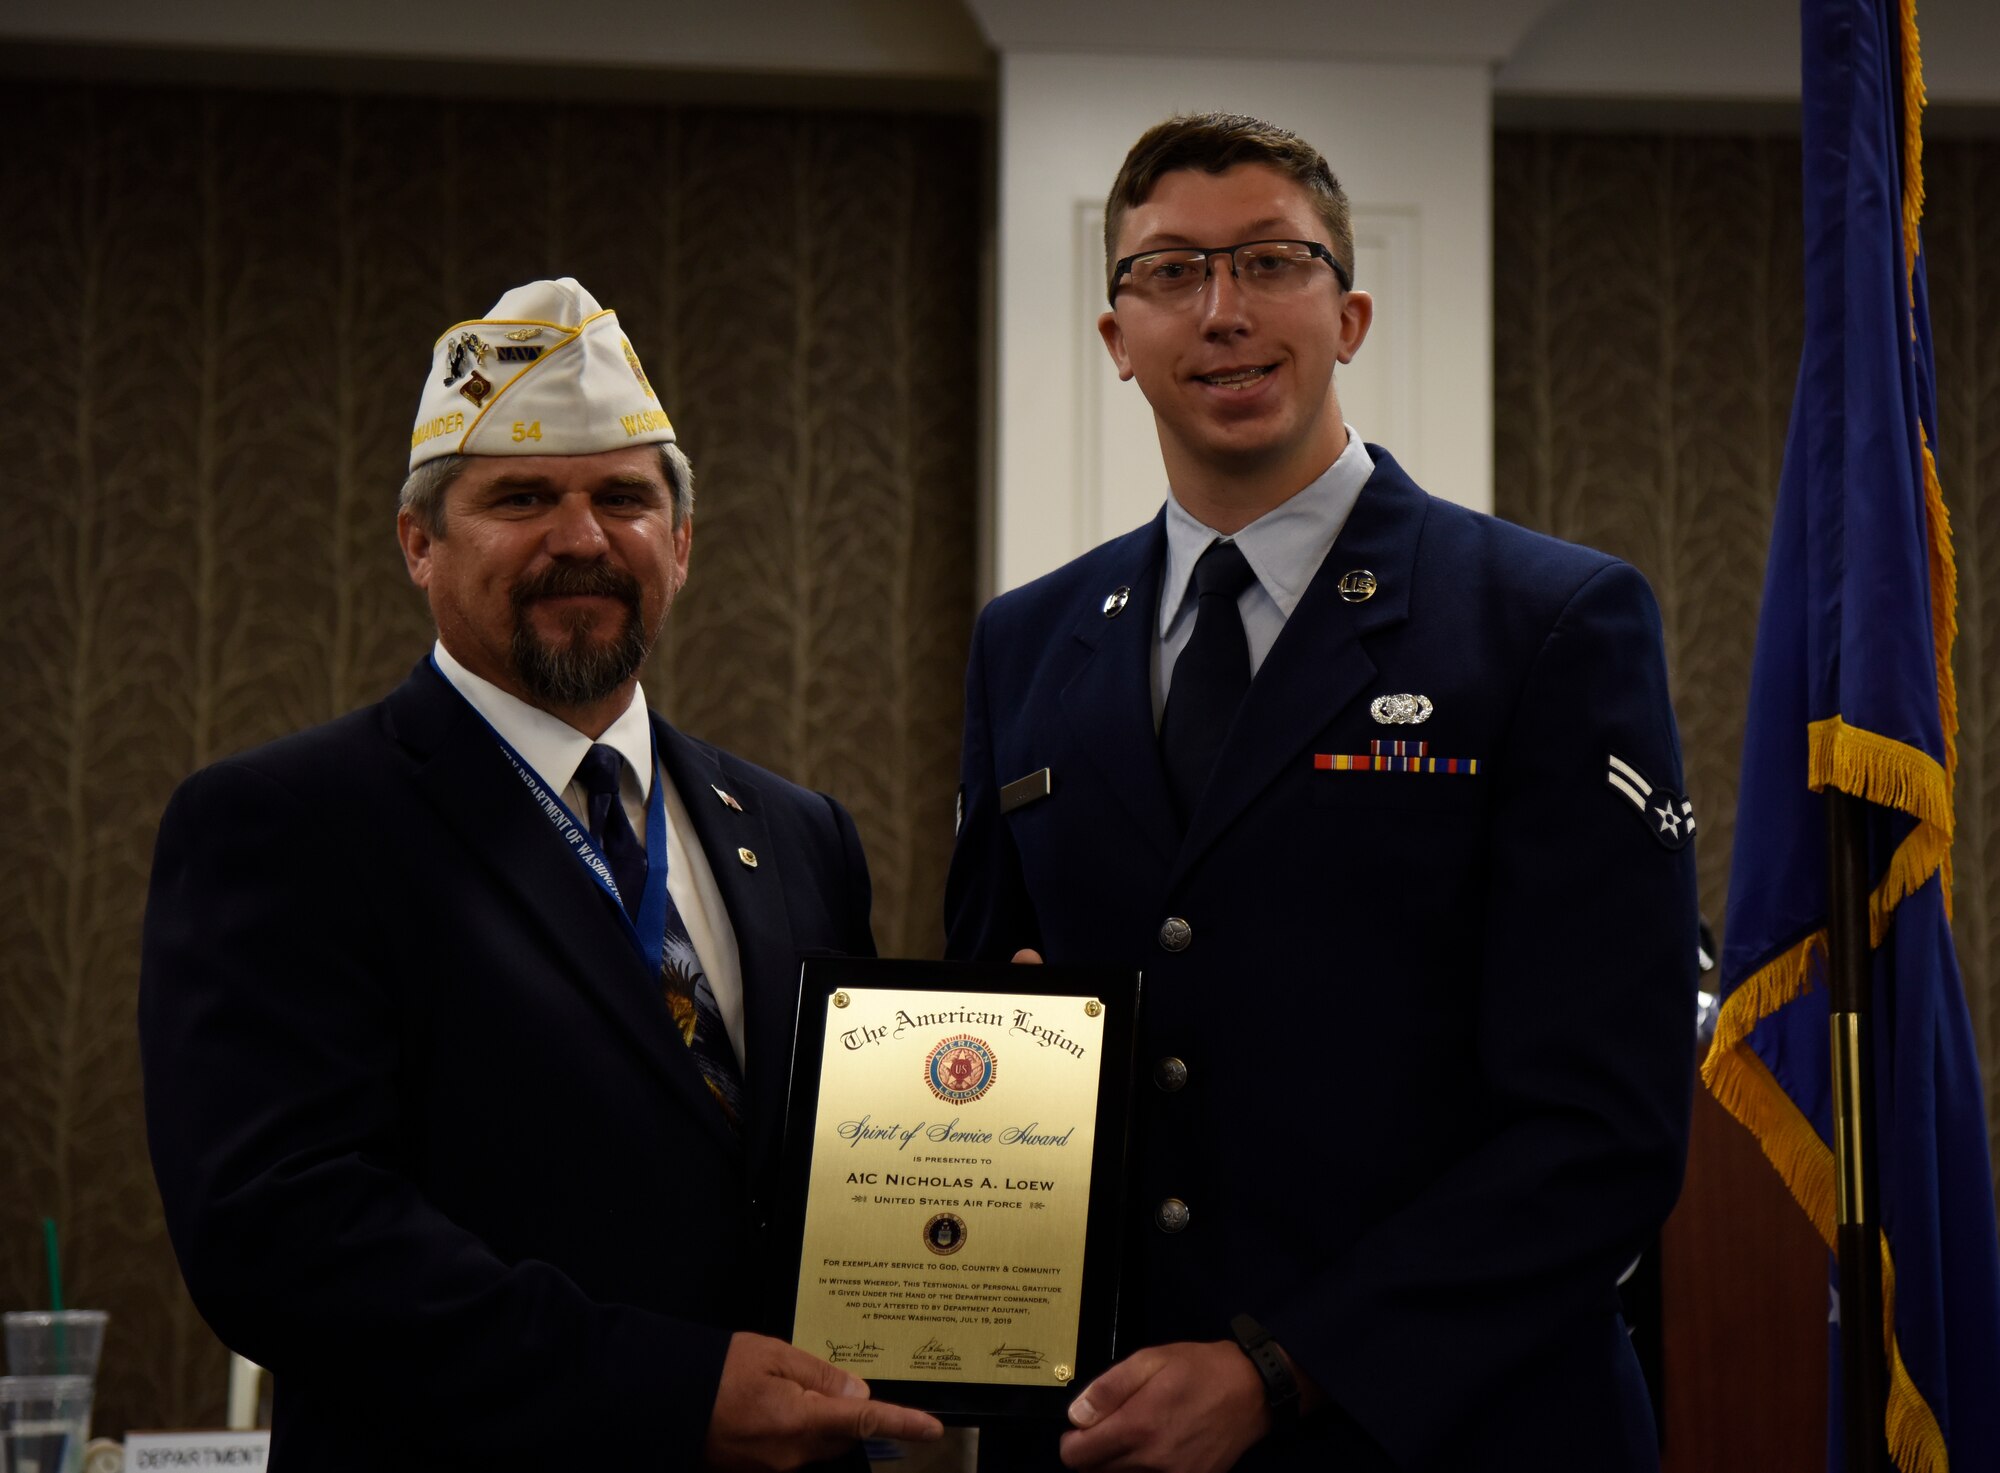 Gary Roach, The American Legion department commander, presents the Spirit of Service Award to Airman 1st Class Nicholas Loew, 92nd Logistics Readiness Squadron fuels distribution operator, during the annual American Legion Department Convention in Spokane, Washington, July 19, 2019. A commitment to the local community led to Loew selflessly volunteering in 33 separate events, for a total of 364 hours. Furthermore, he rallied nineteen volunteers to serve over 3 thousand dinners to less fortunate at the City Gate homeless shelter. (U.S. Air Force photo by Senior Airman Jesenia Landaverde)